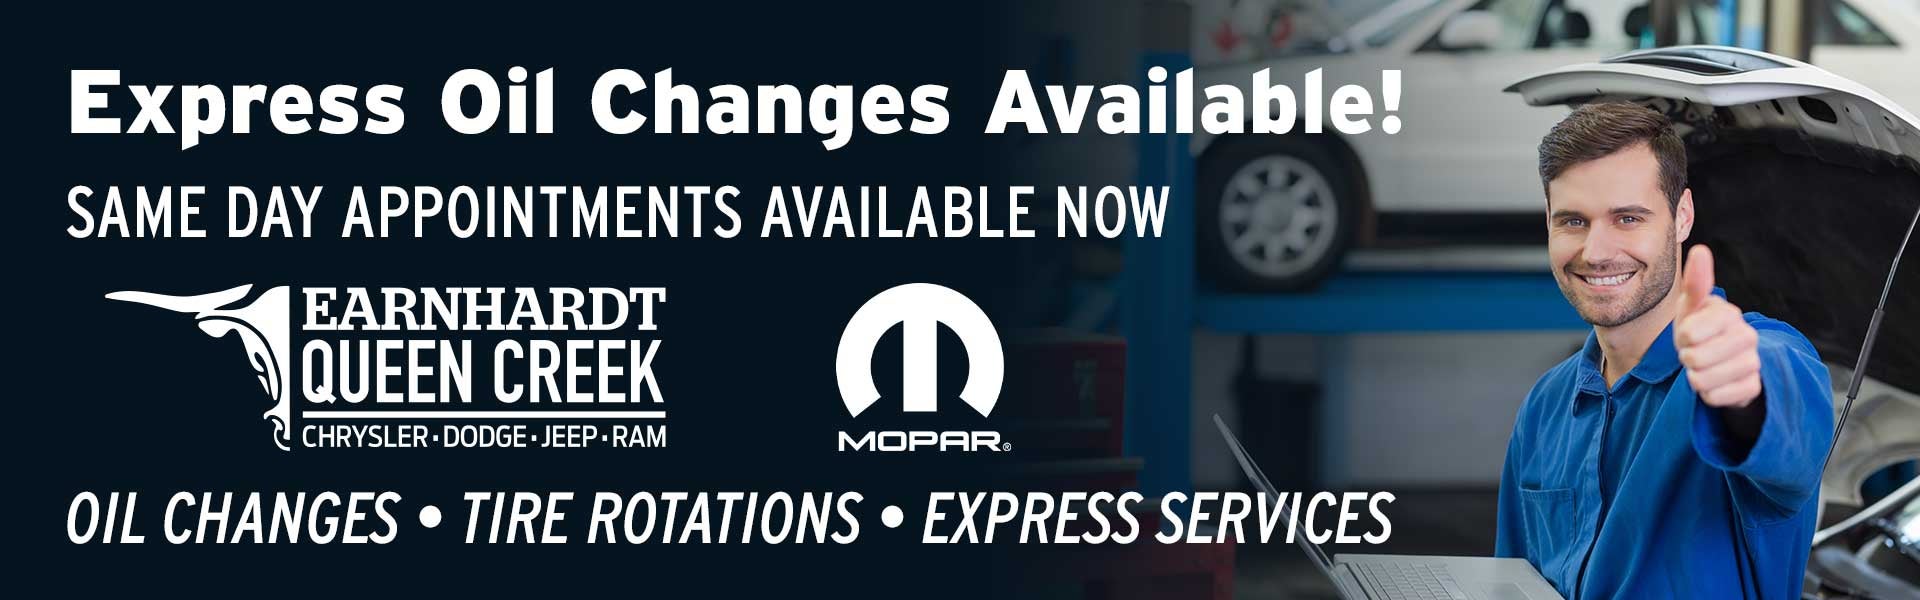 Express Oil Changes Available!